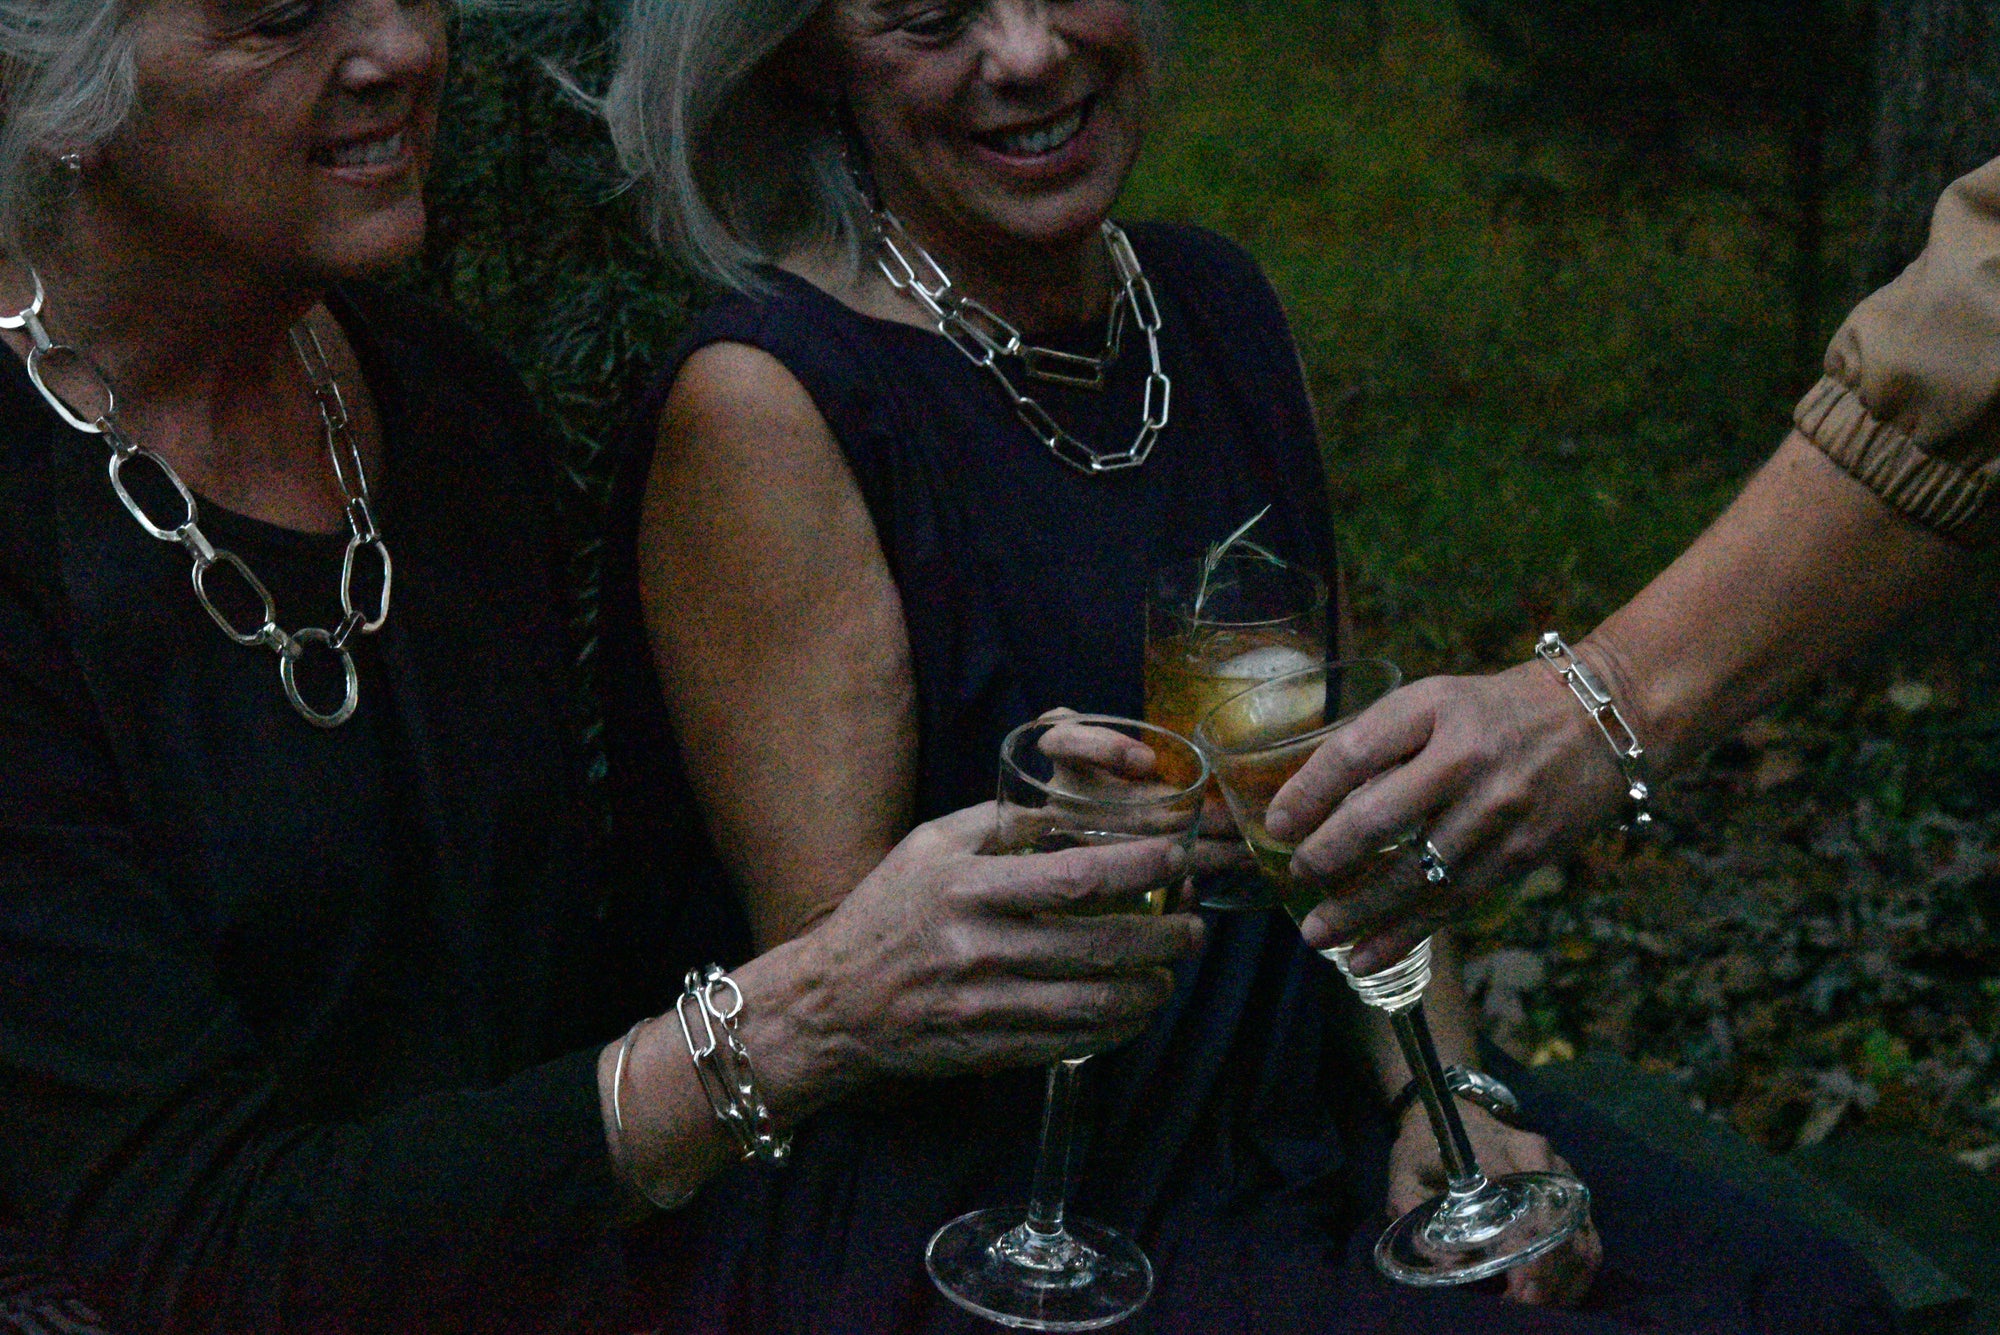 An image of three ladies wearing liz hanson metalsmith jewelry, celebrating something big, rejoicing. Each wearing a signature sterling silver statement jewelry look.